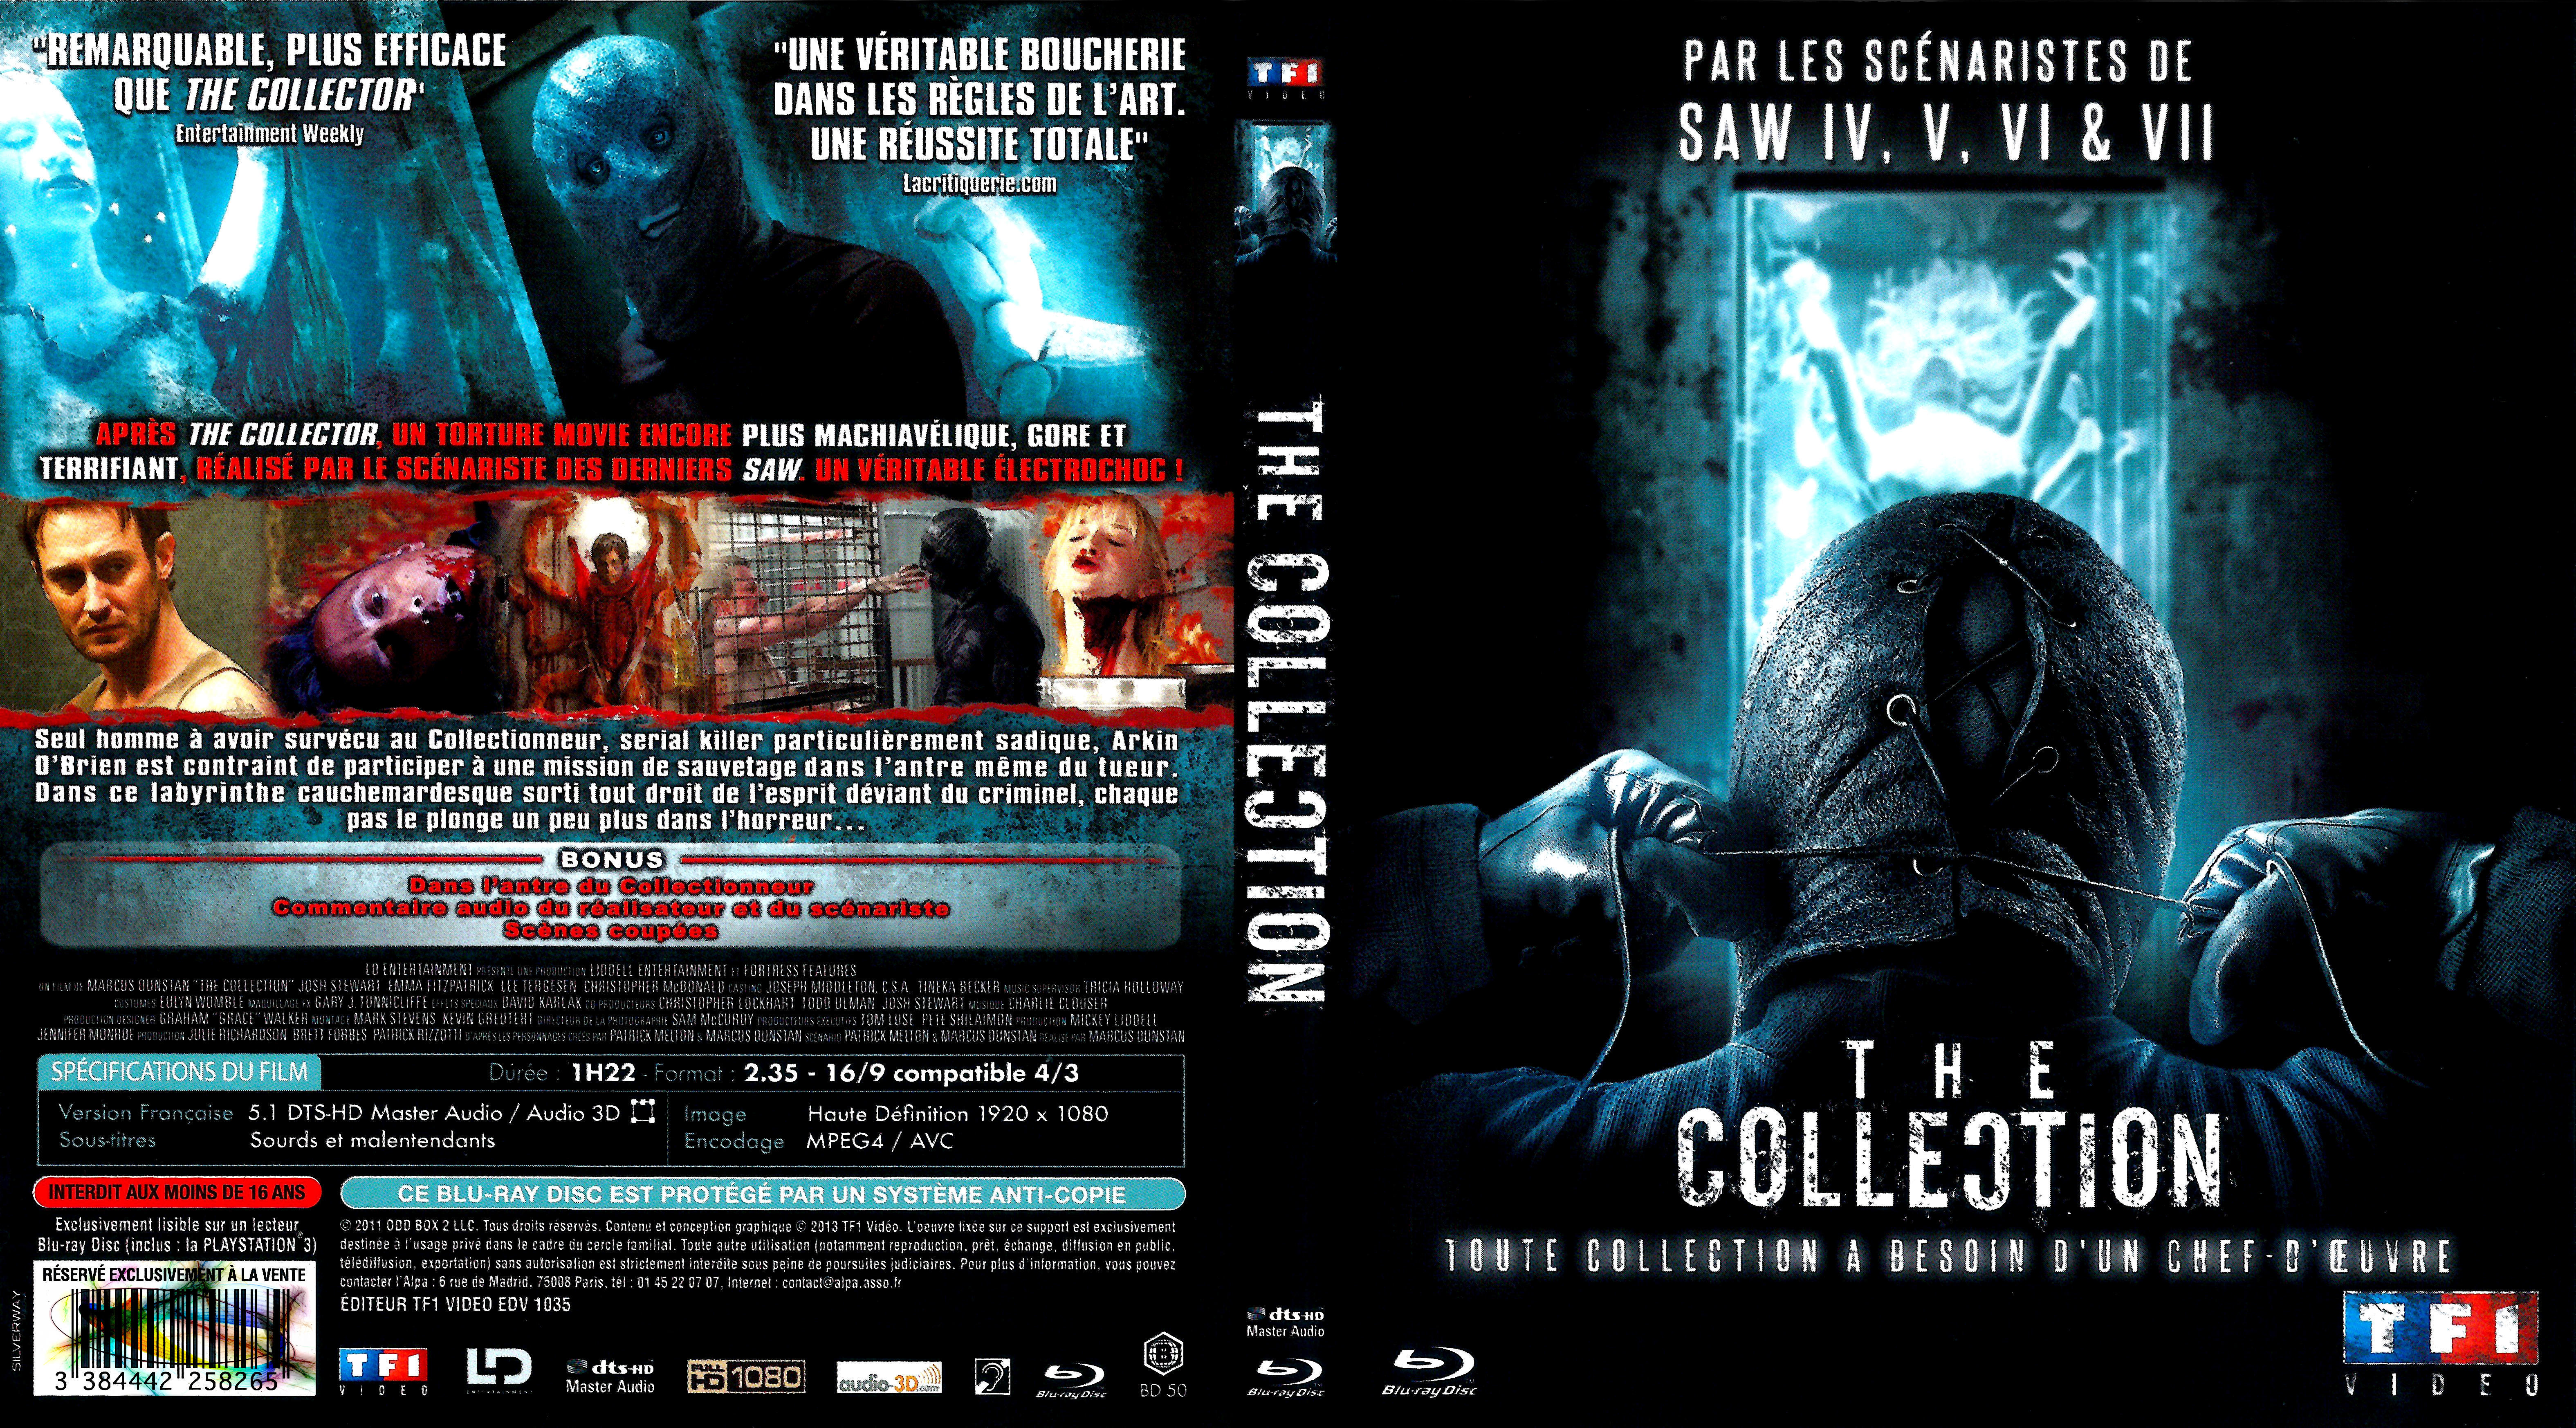 Jaquette DVD The collection (BLU-RAY)